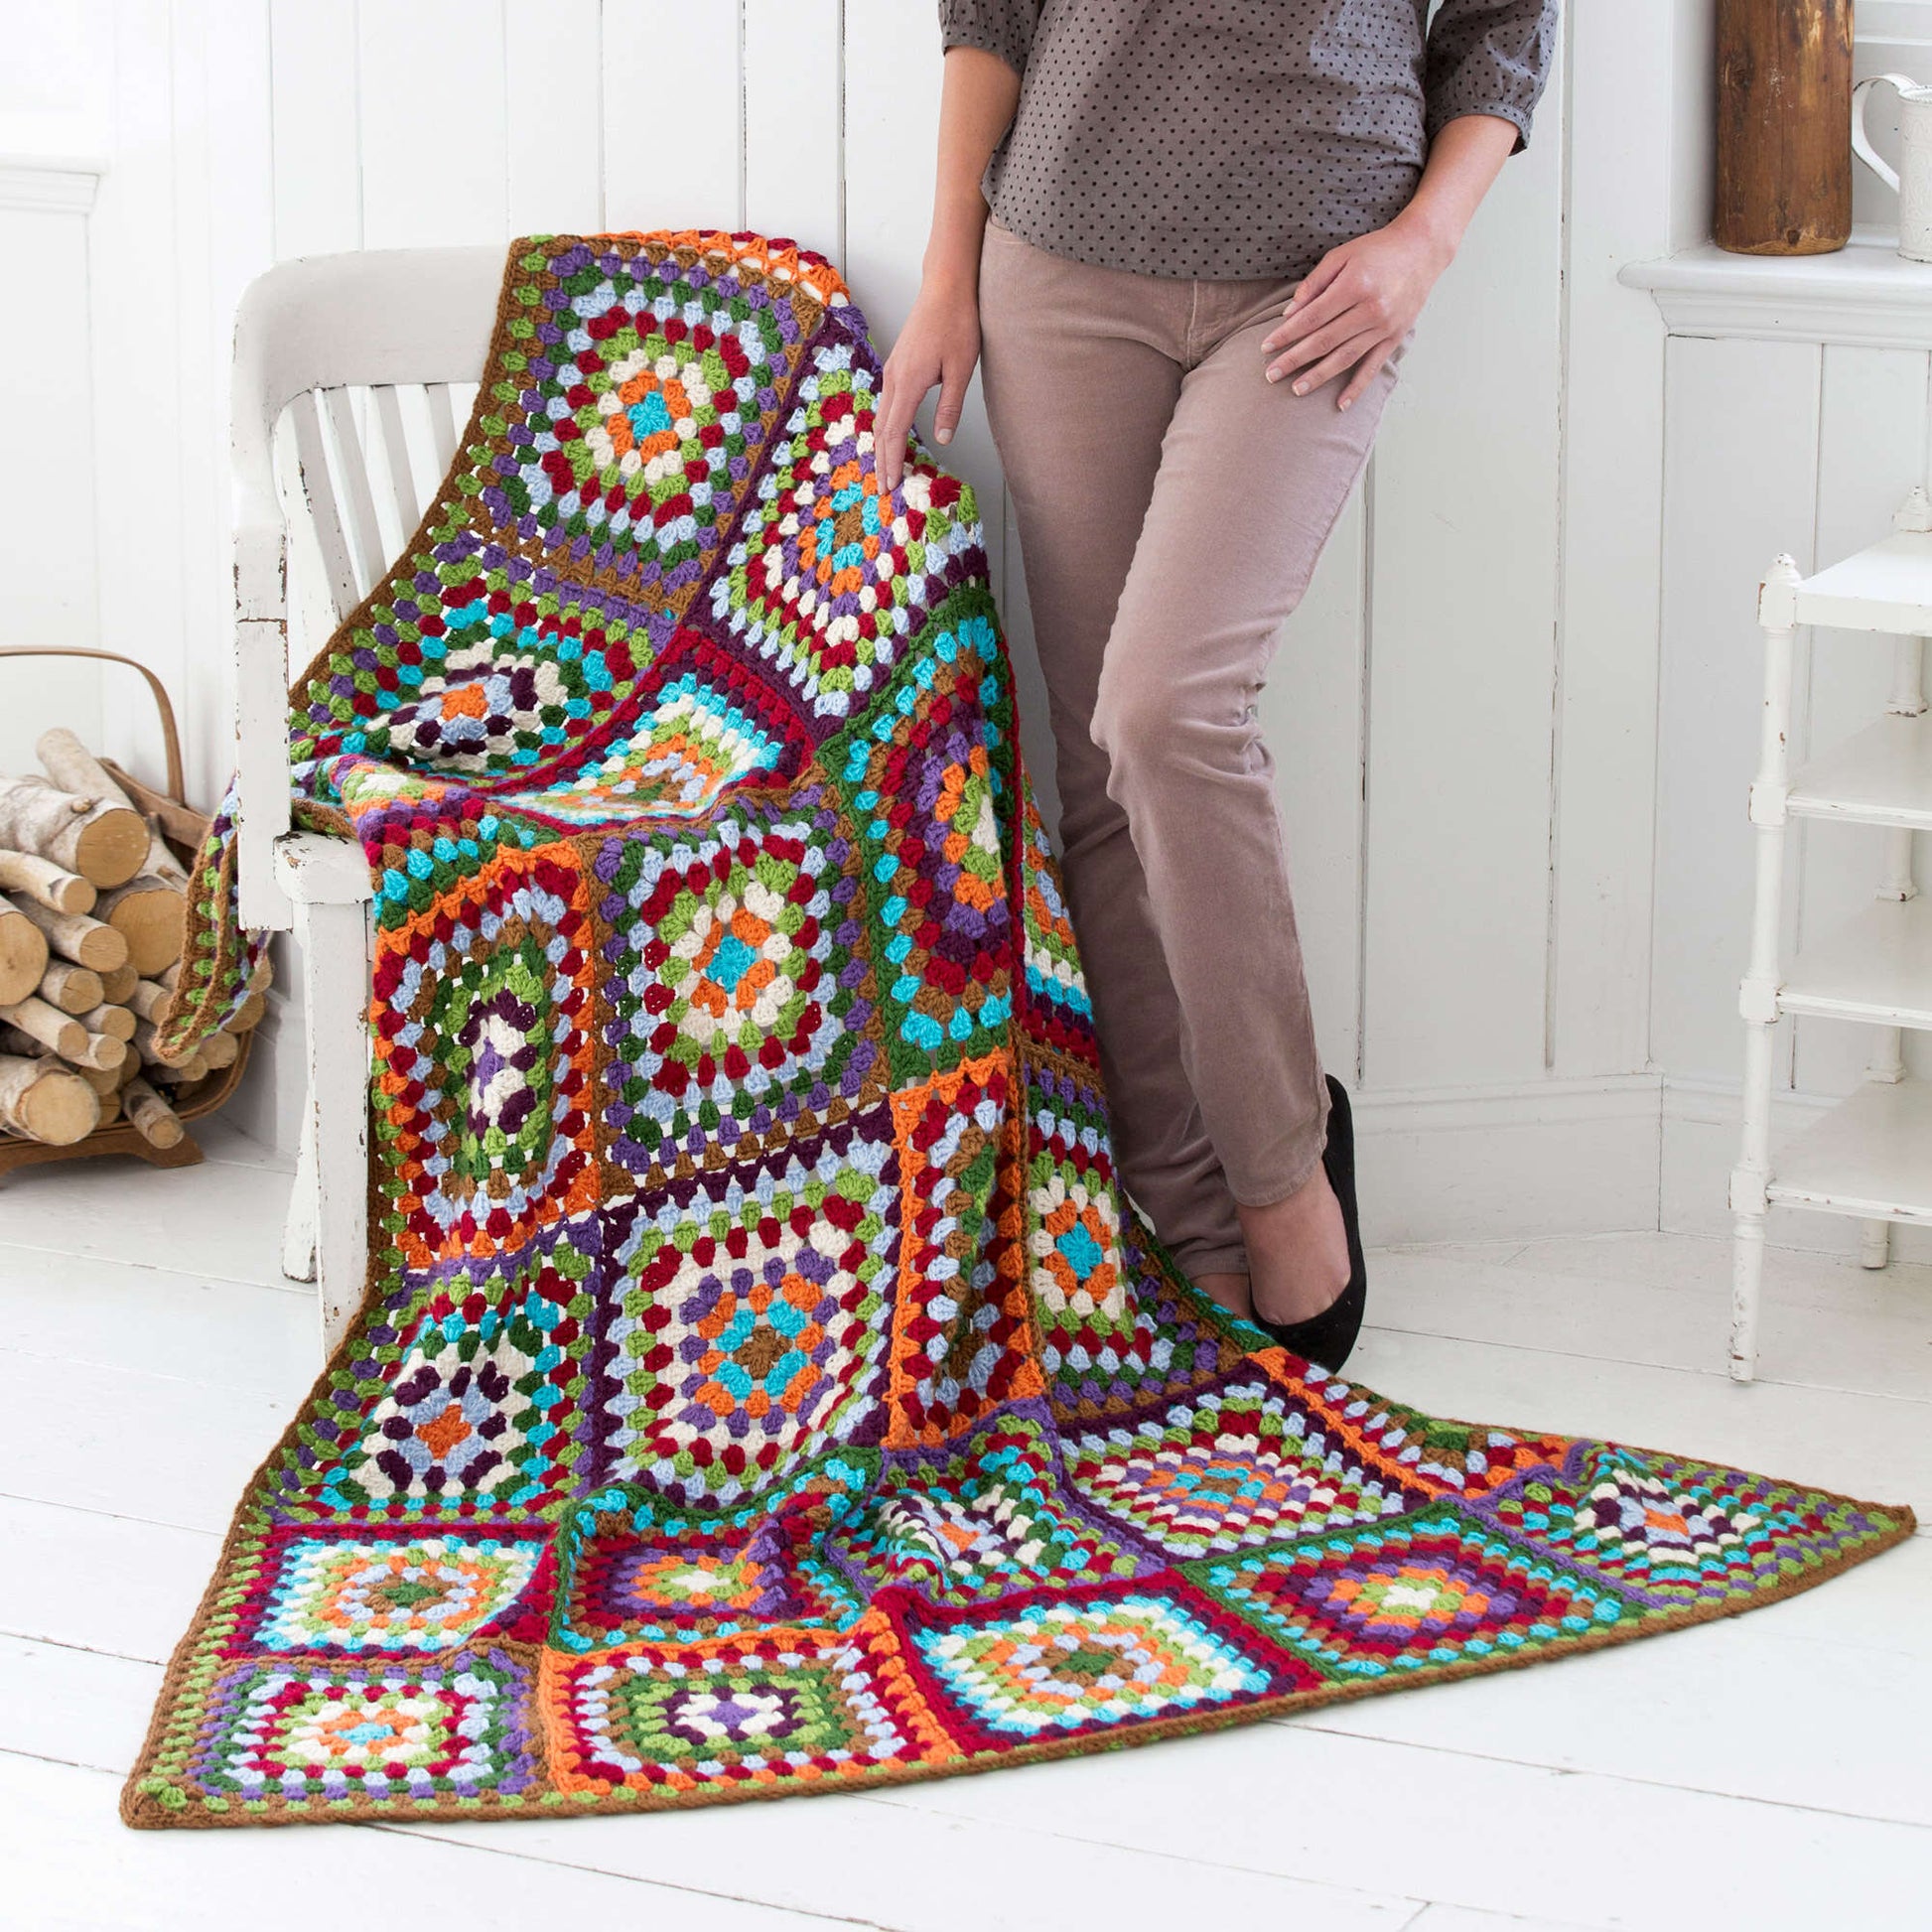 Free Red Heart Crochet Granny's Classic Throw Pattern